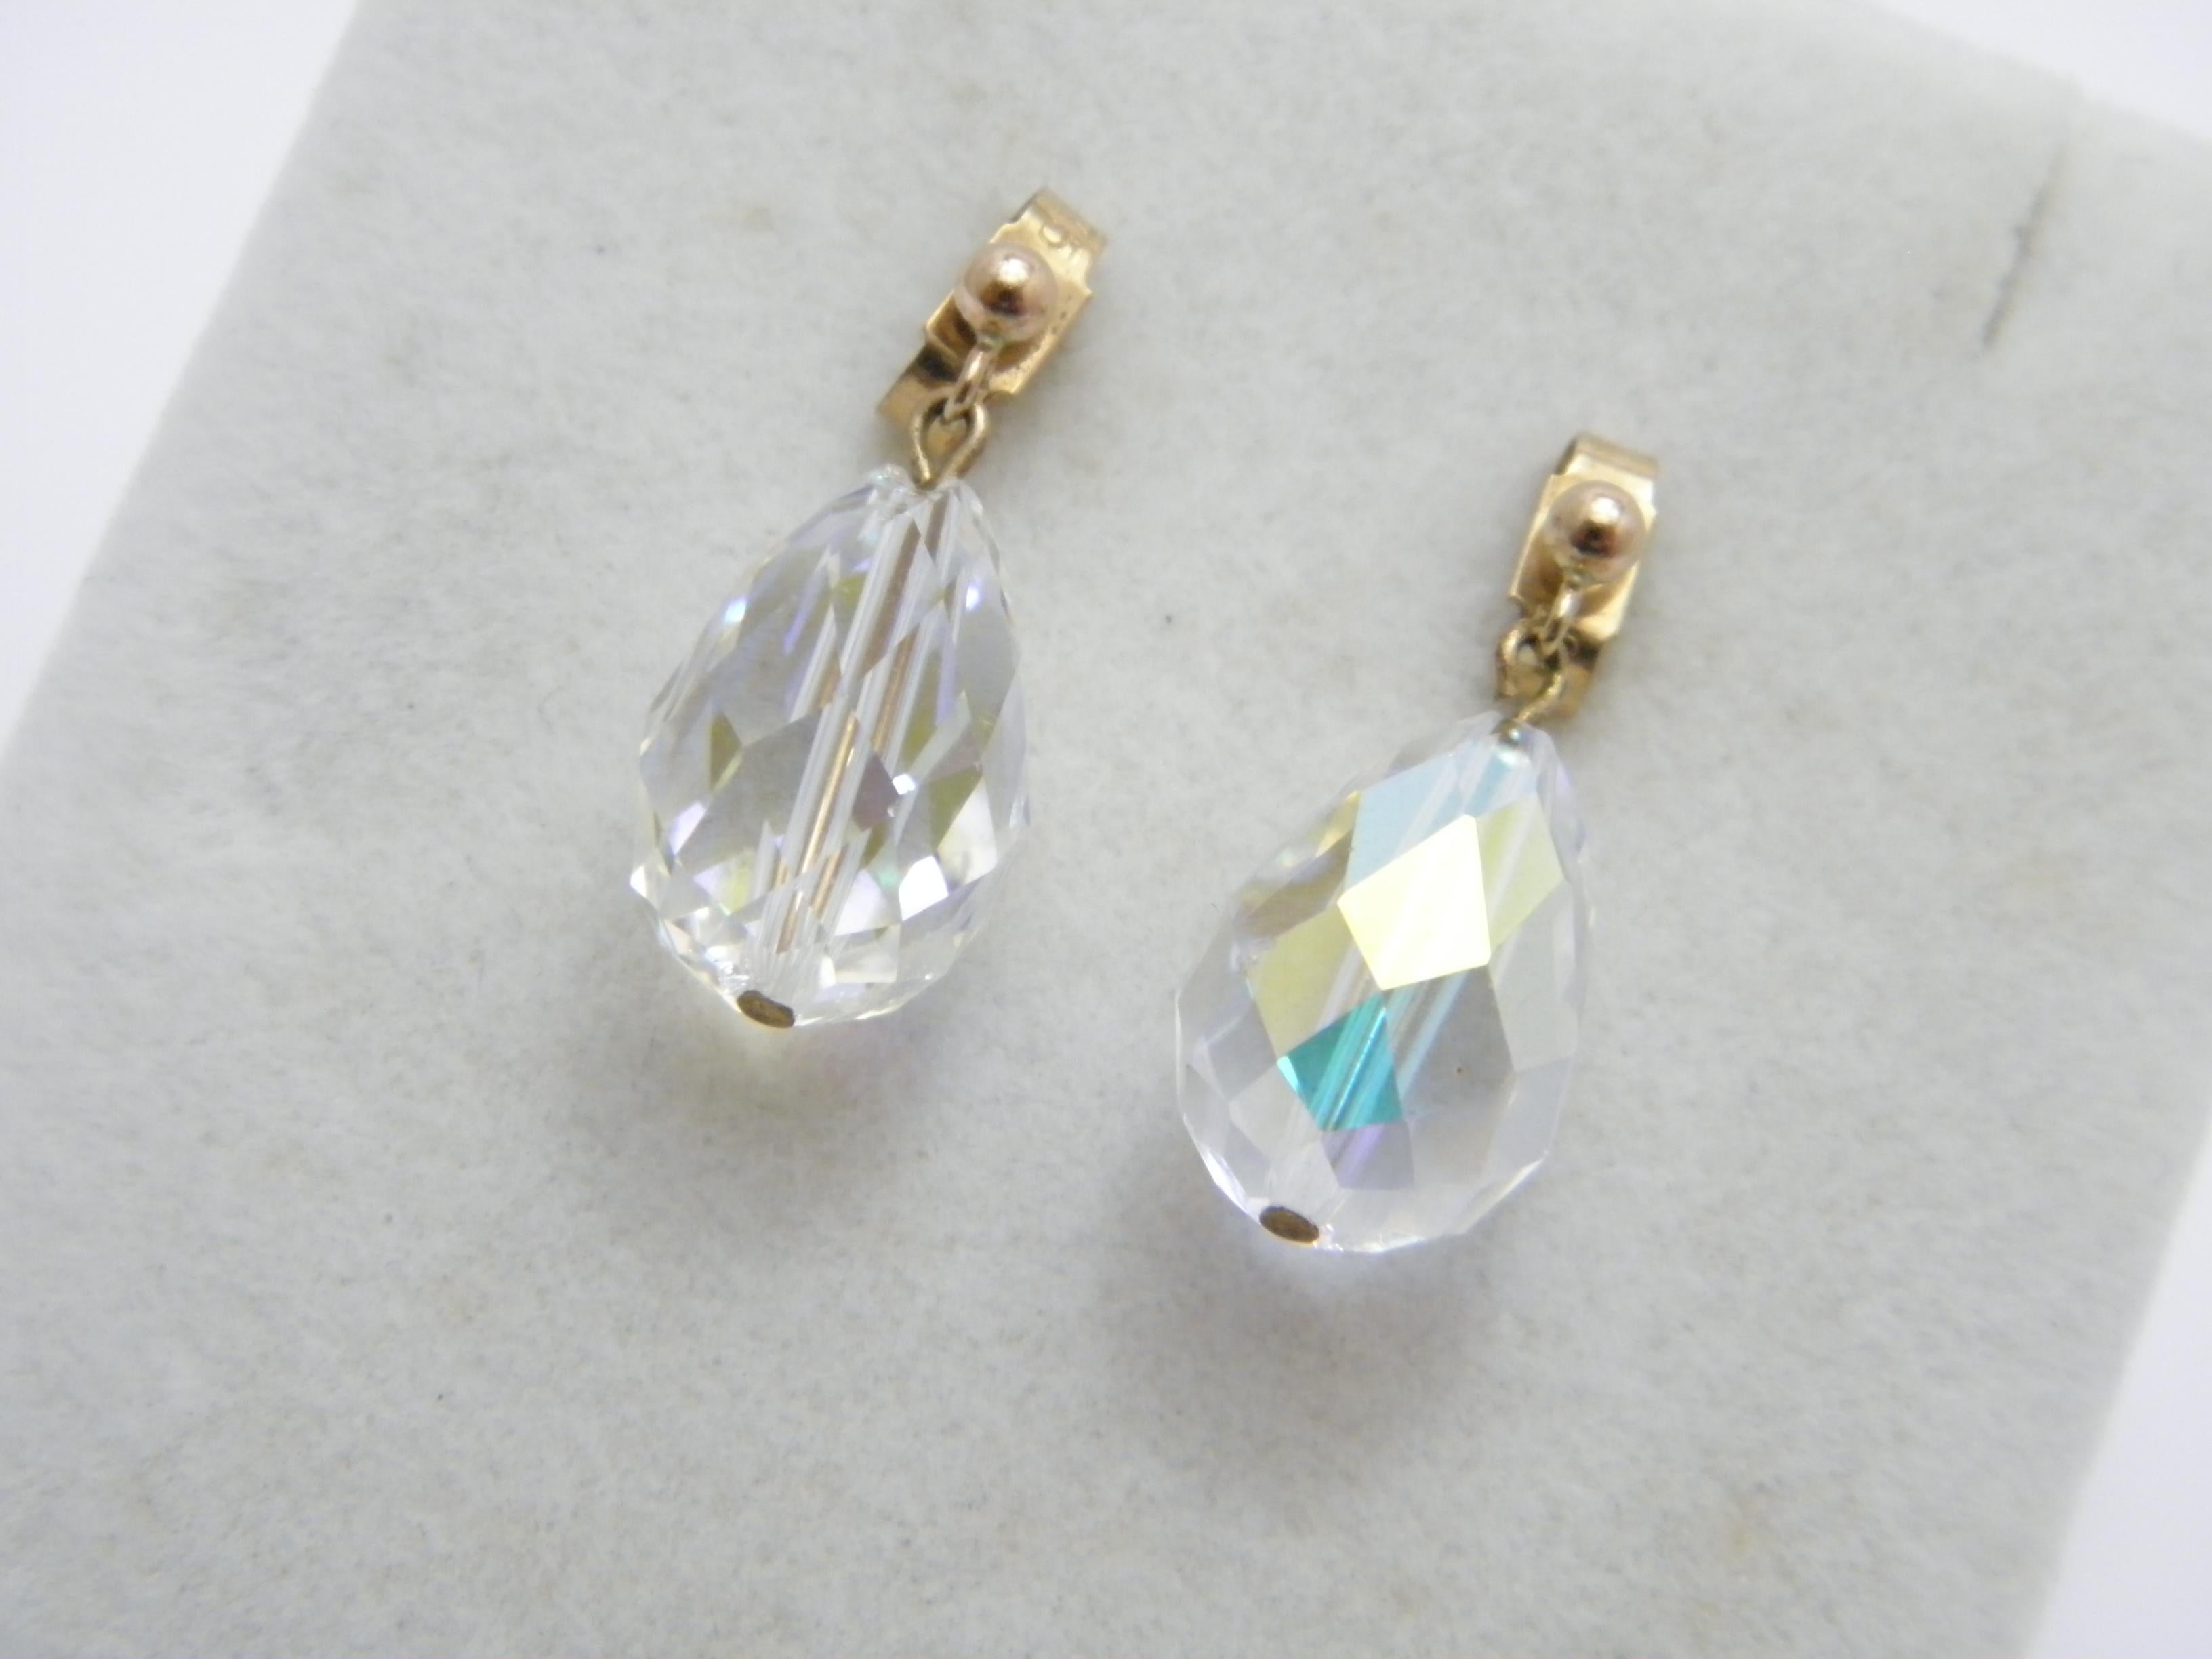 A very special item for you to consider:

9CT GOLD AURORA BOREALIS DROP EARRINGS

DETAILS
Material: 375/1000 9ct Solid Yellow Gold
Style: Deco style large drop / dangle earrings - very stylish
Gemstone: Facetted pear cut Aurora Borealis (mystic